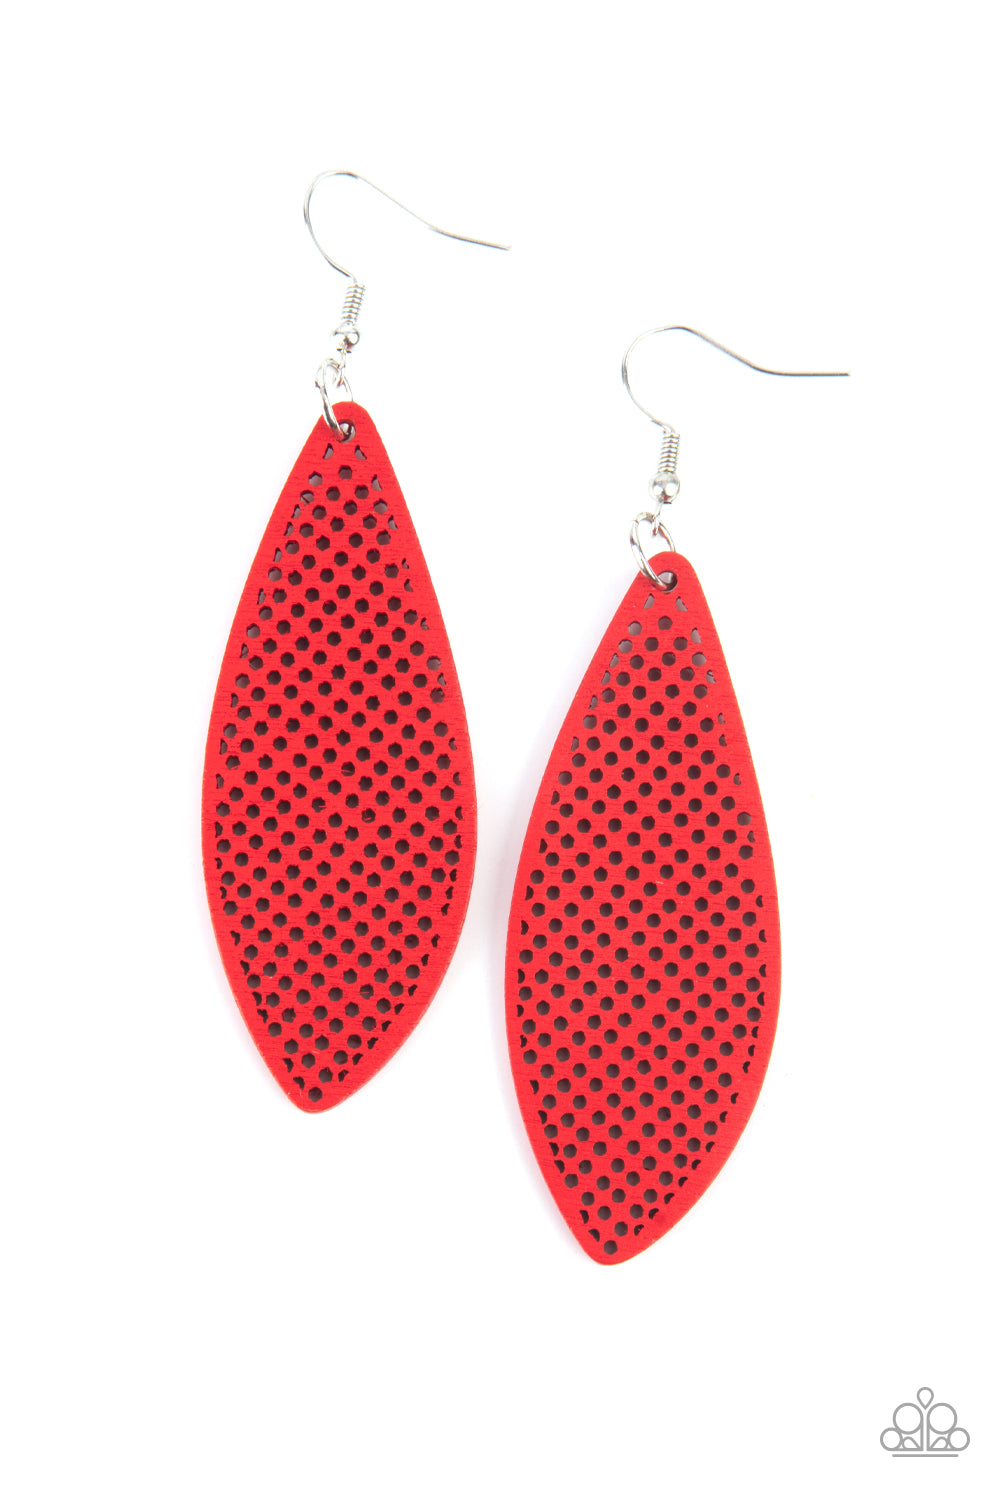 ** 0476 Paparazzi Accessories Surf Scene - Red Earrings